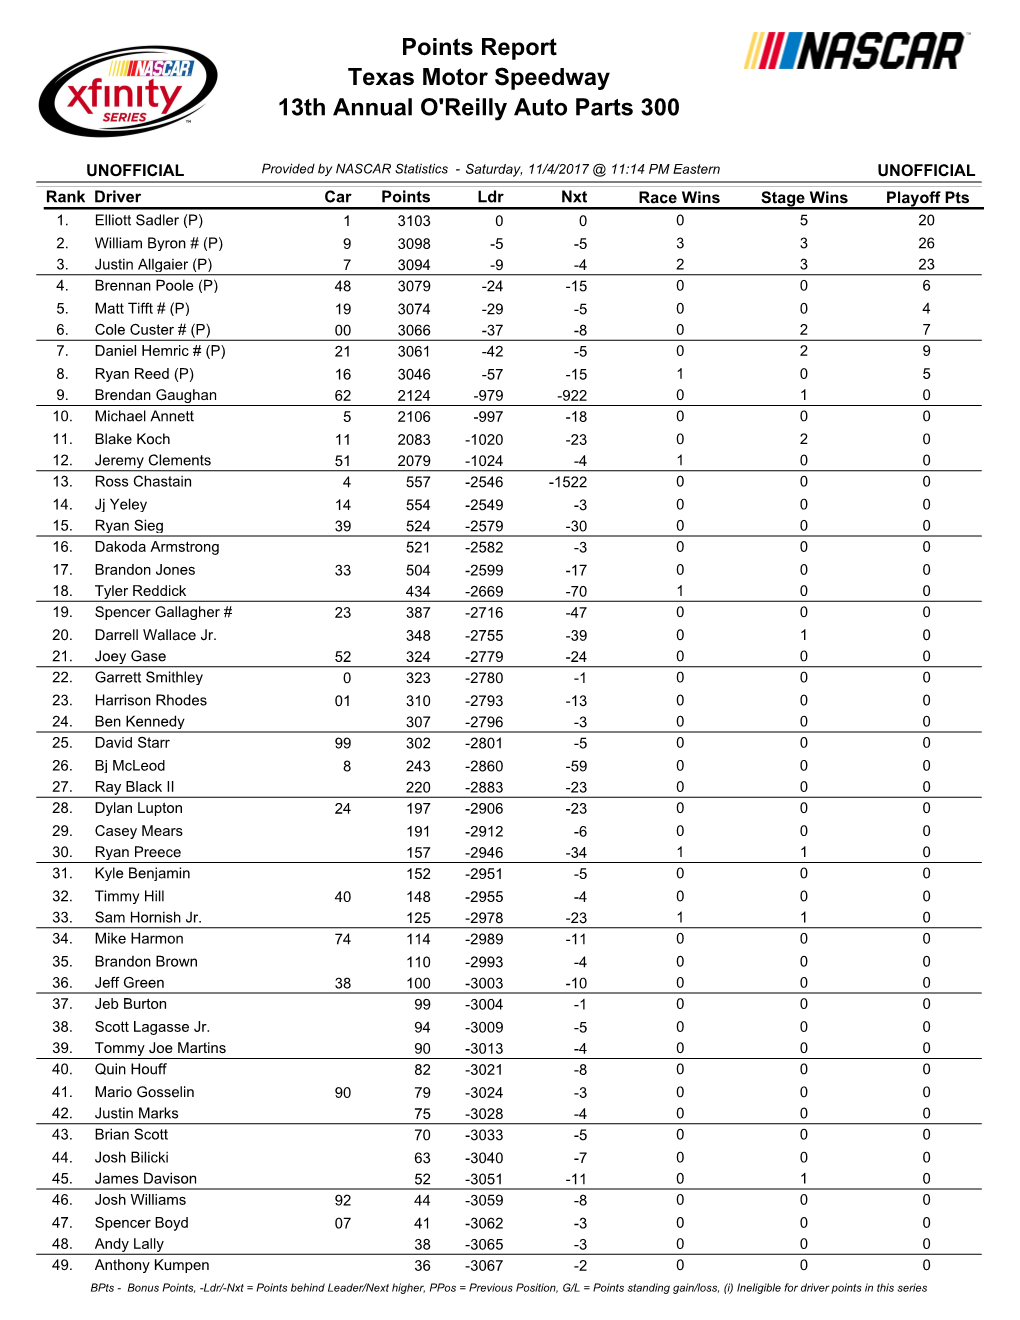 Xfinity Series Updated Driver Points